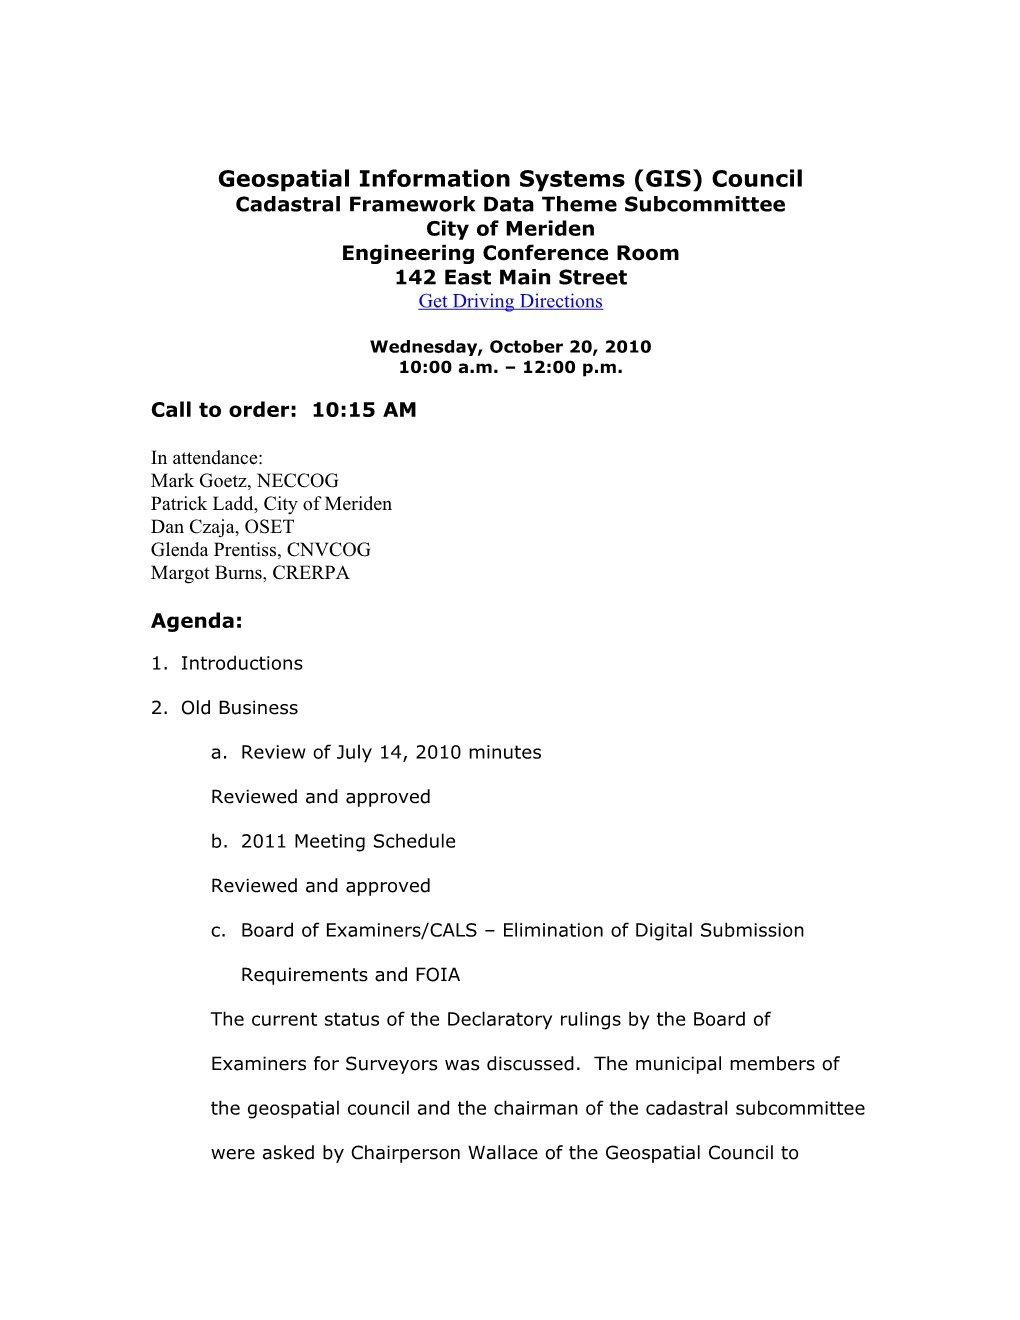 Geospatial Information Systems (GIS)Council